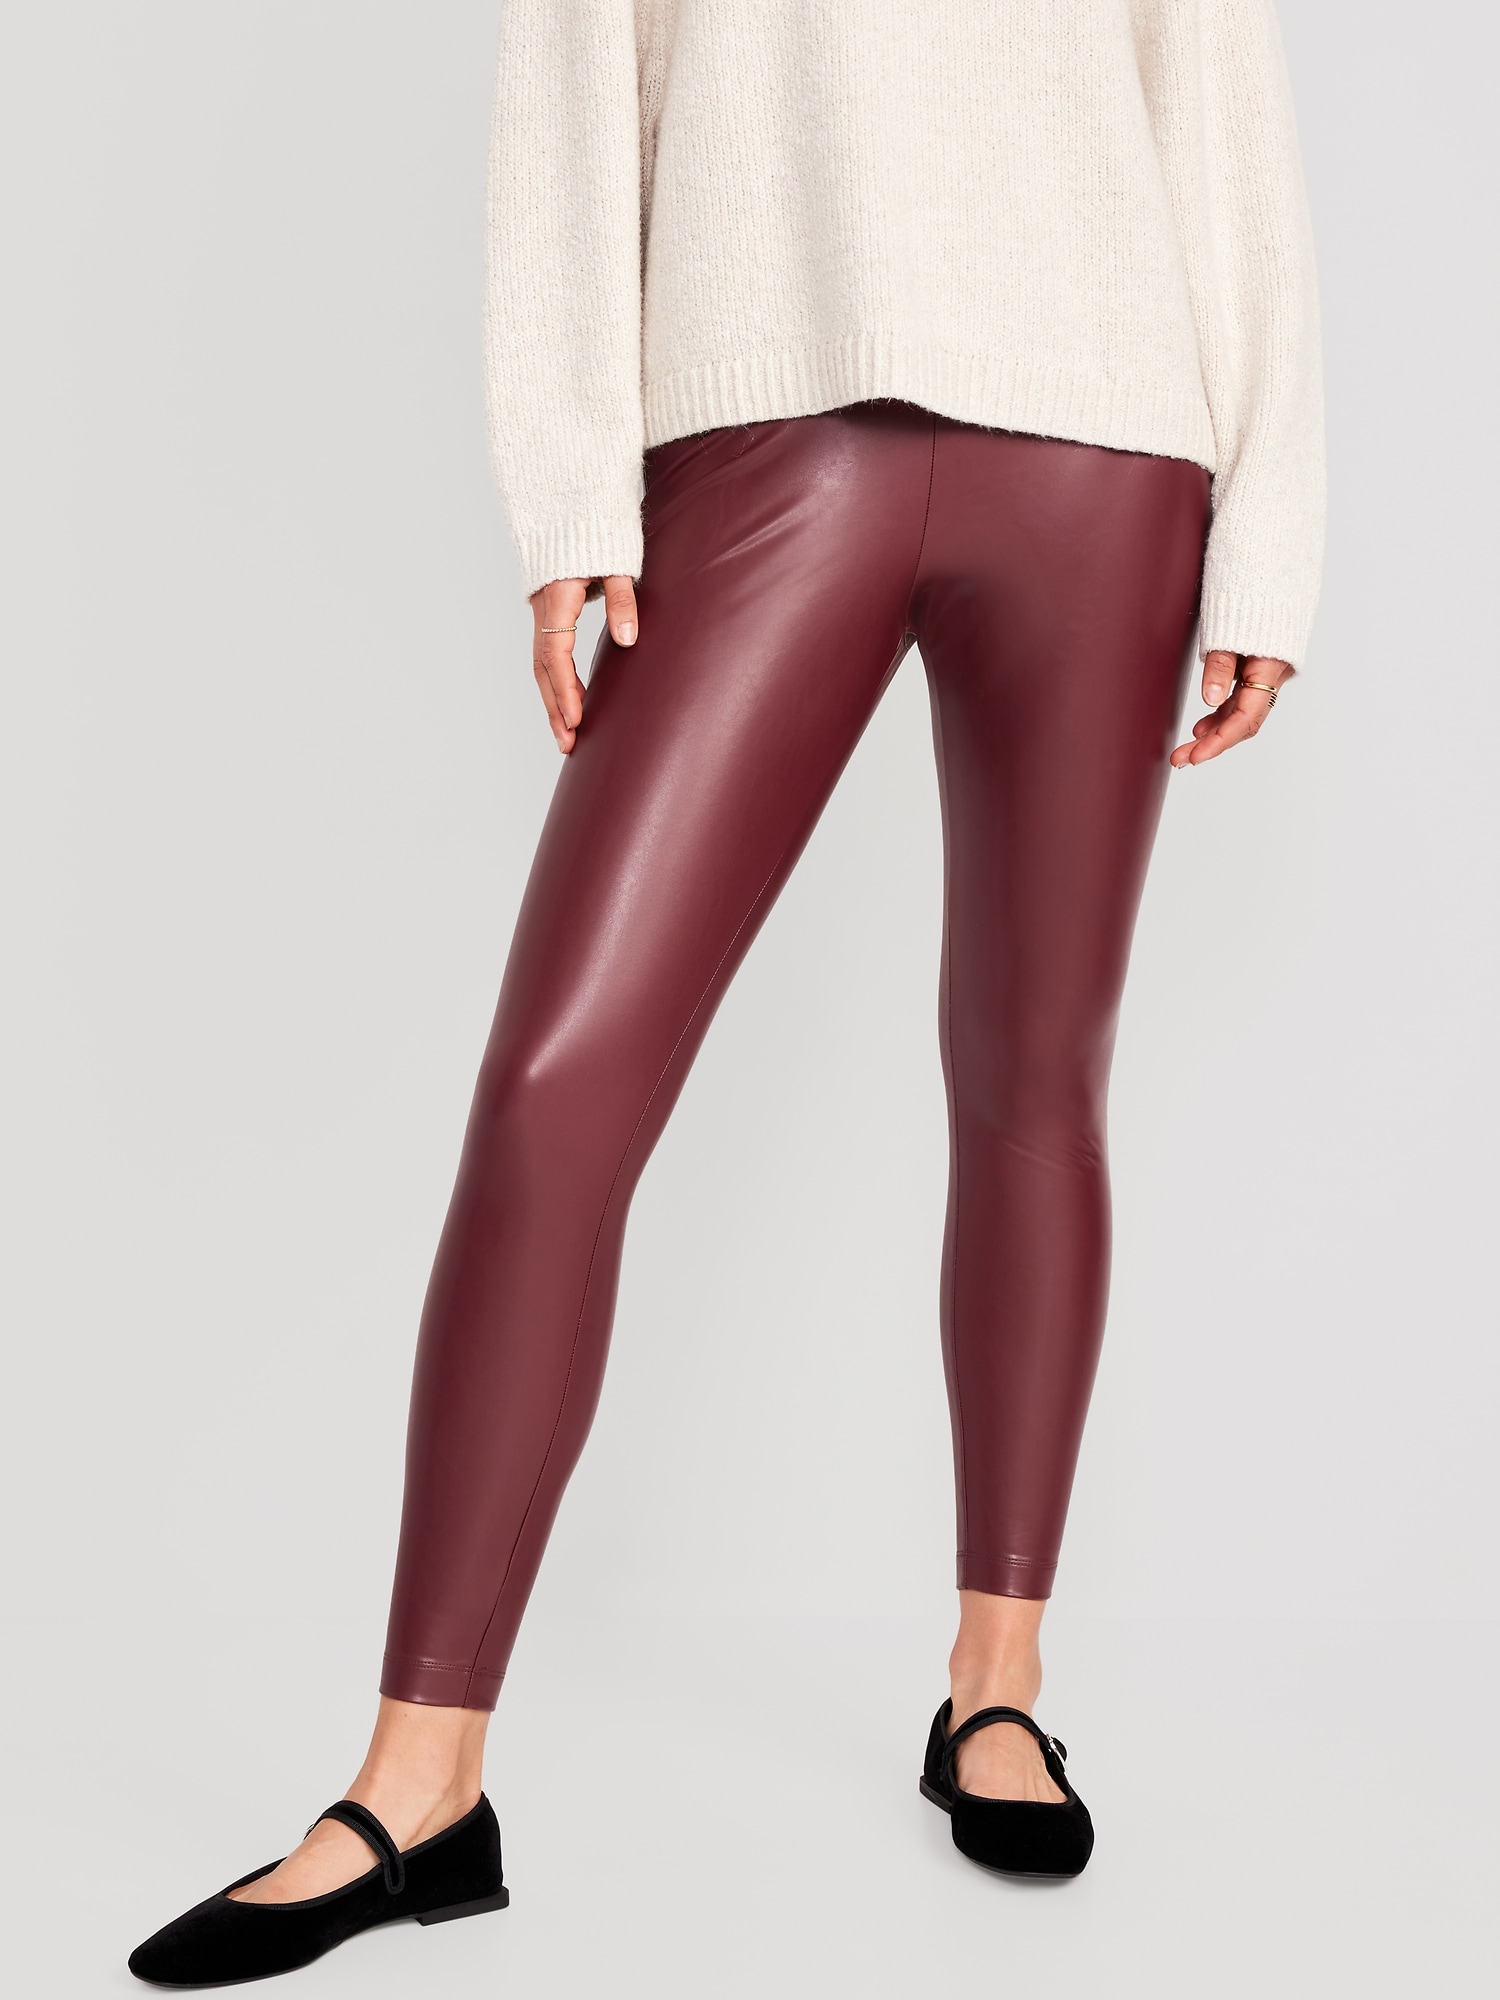  Women's High Waist Faux Leather Leggings Tights